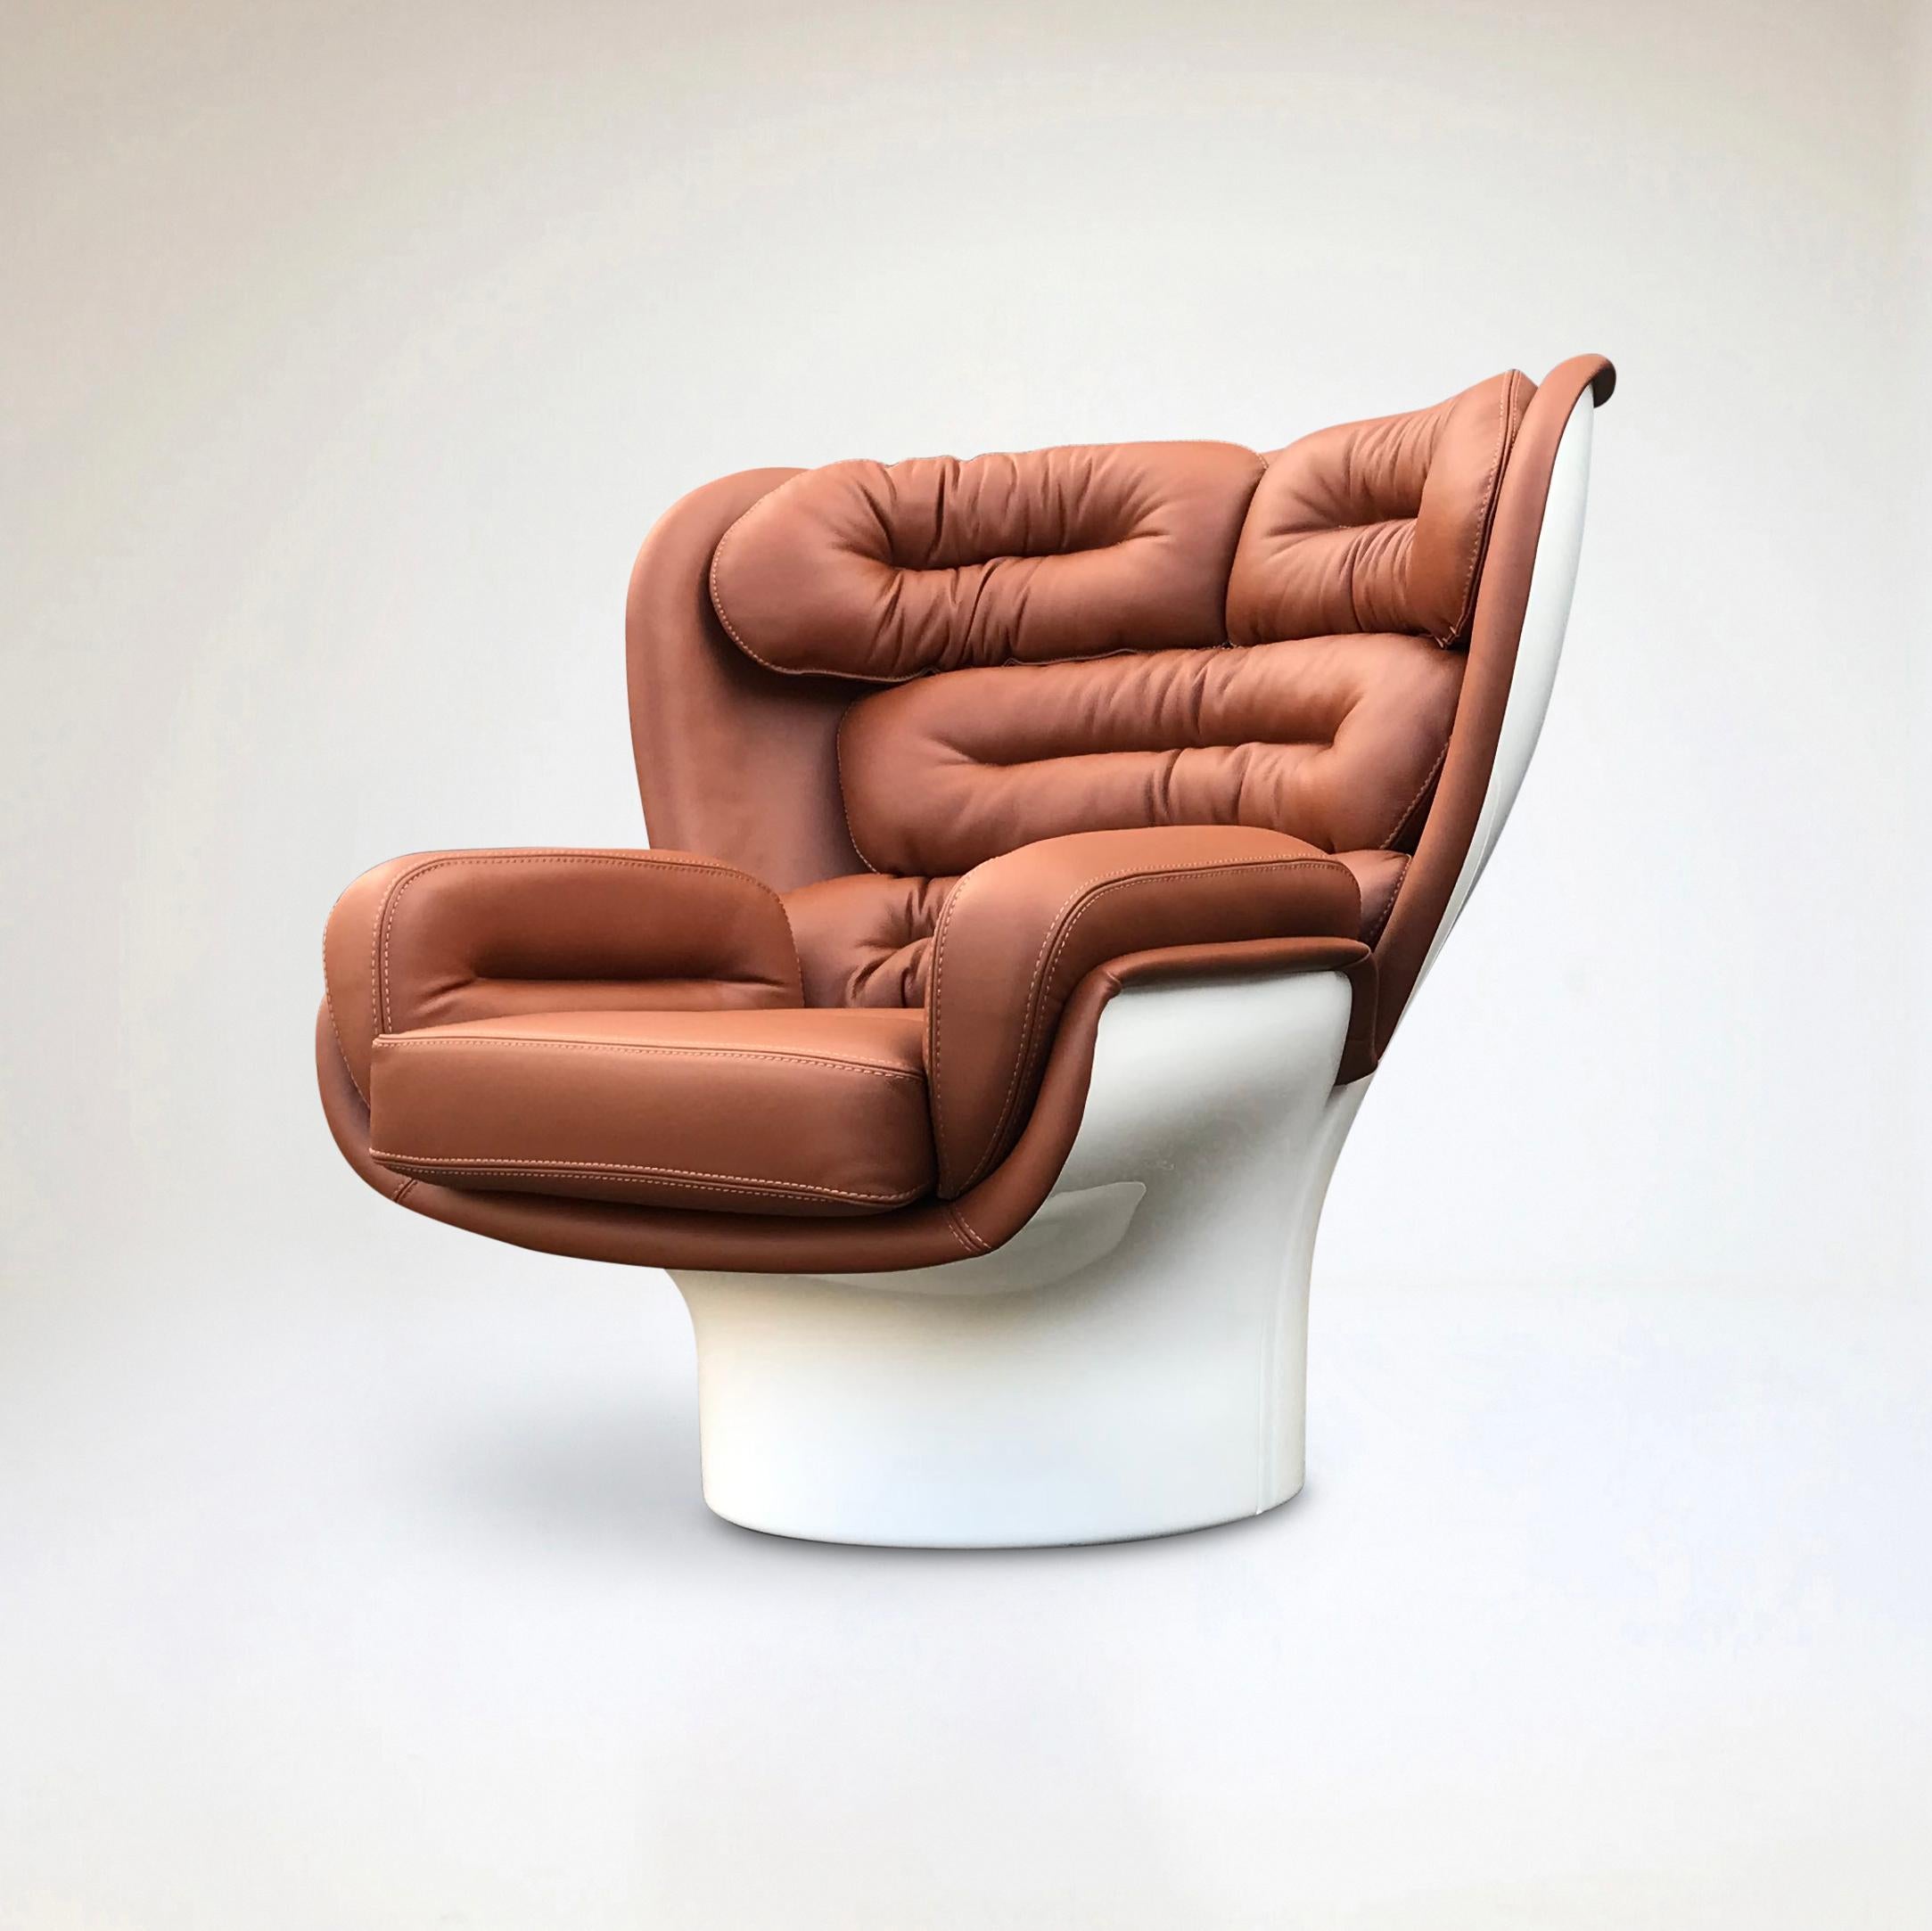 What more can be said about this iconic design by Joe Colombo that hasn’t been said before? A design far ahead of its time, on the verge of space age and modernism.

Colombo was able to draw a chair that has become so remarkable over the course of